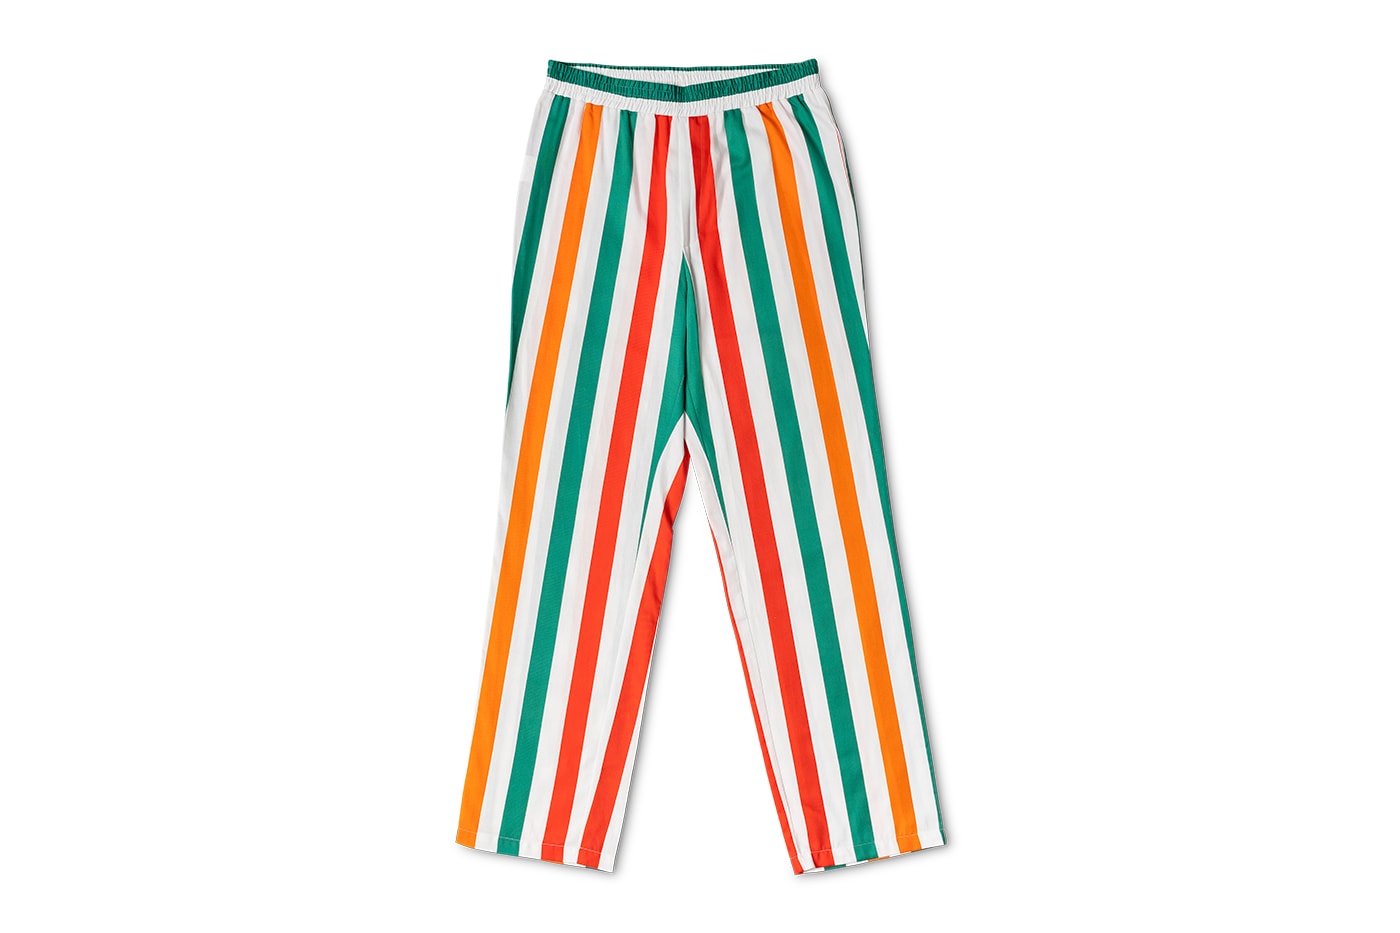 7-eleven sweden pajamas loungewear striped green red white pants